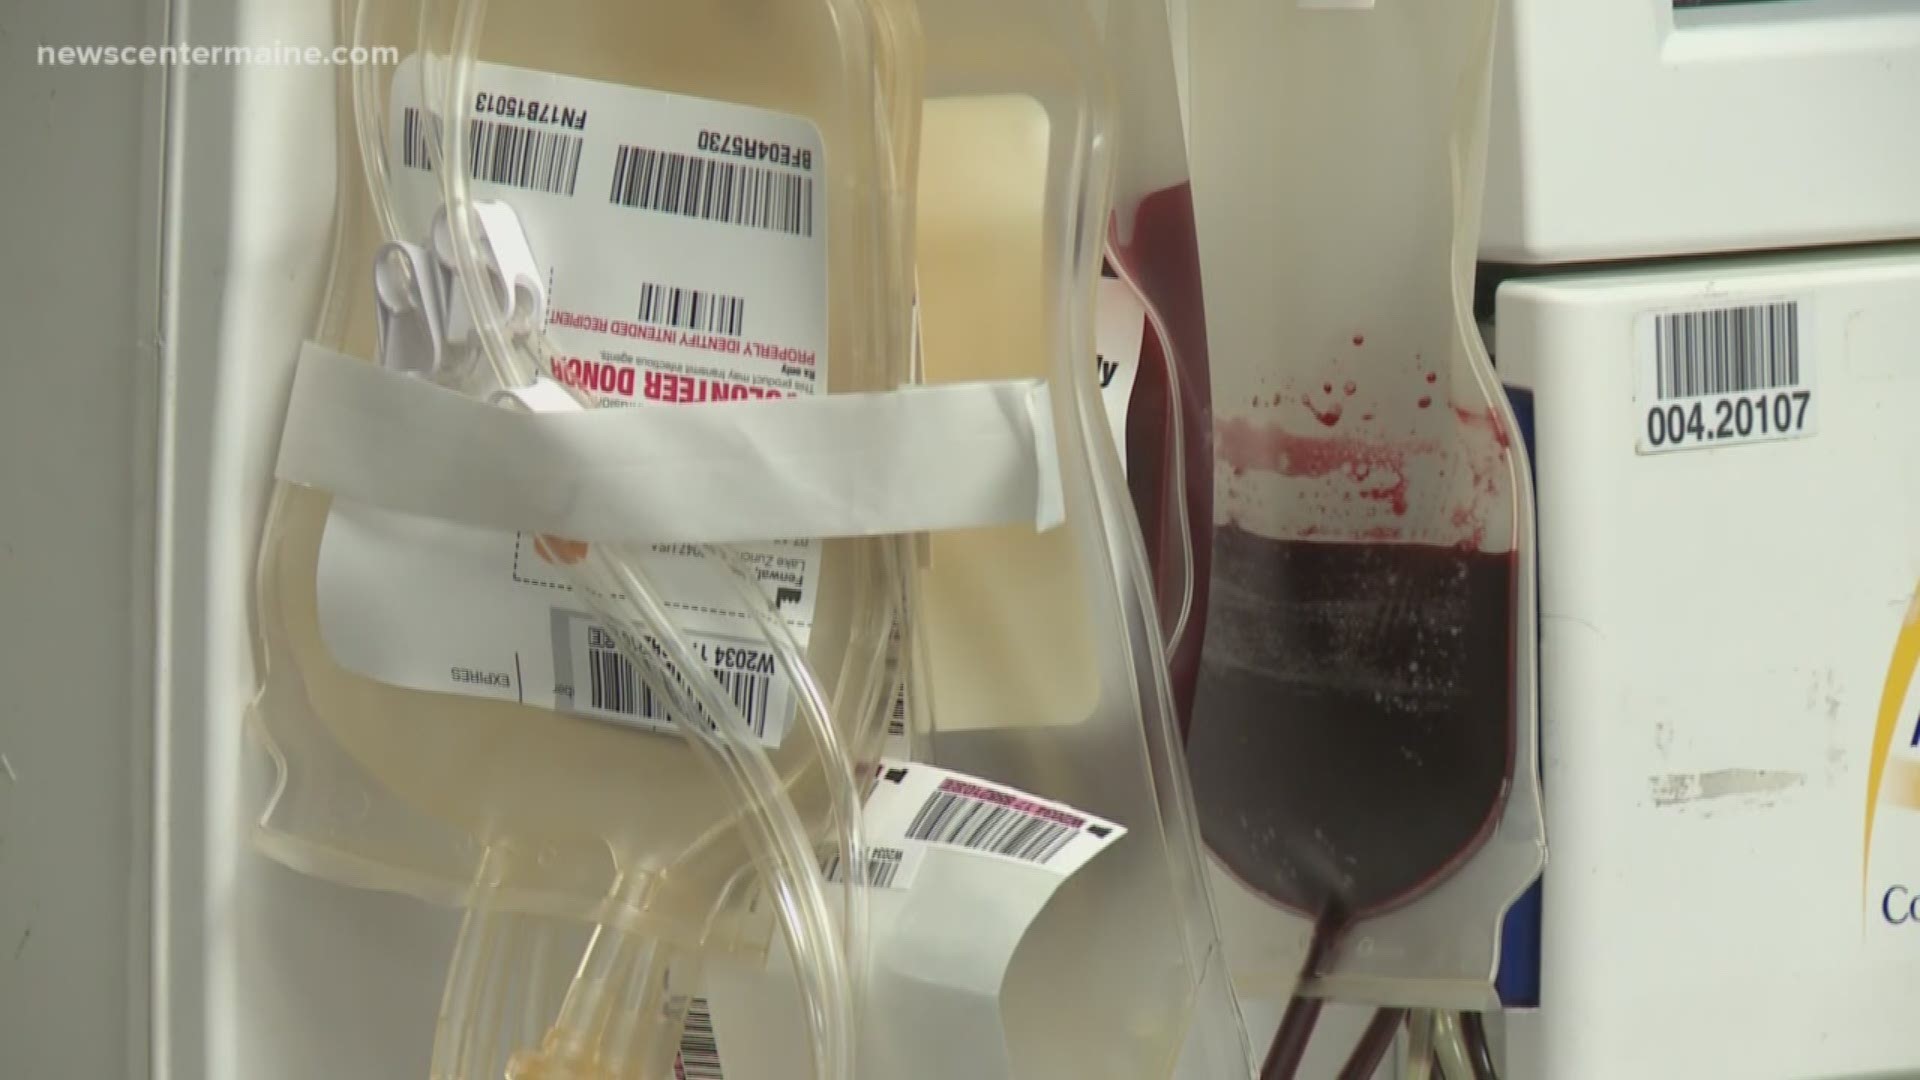 LGBTQ advocates in Maine say a federal ban on gay men donating blood is based on fear, not science.